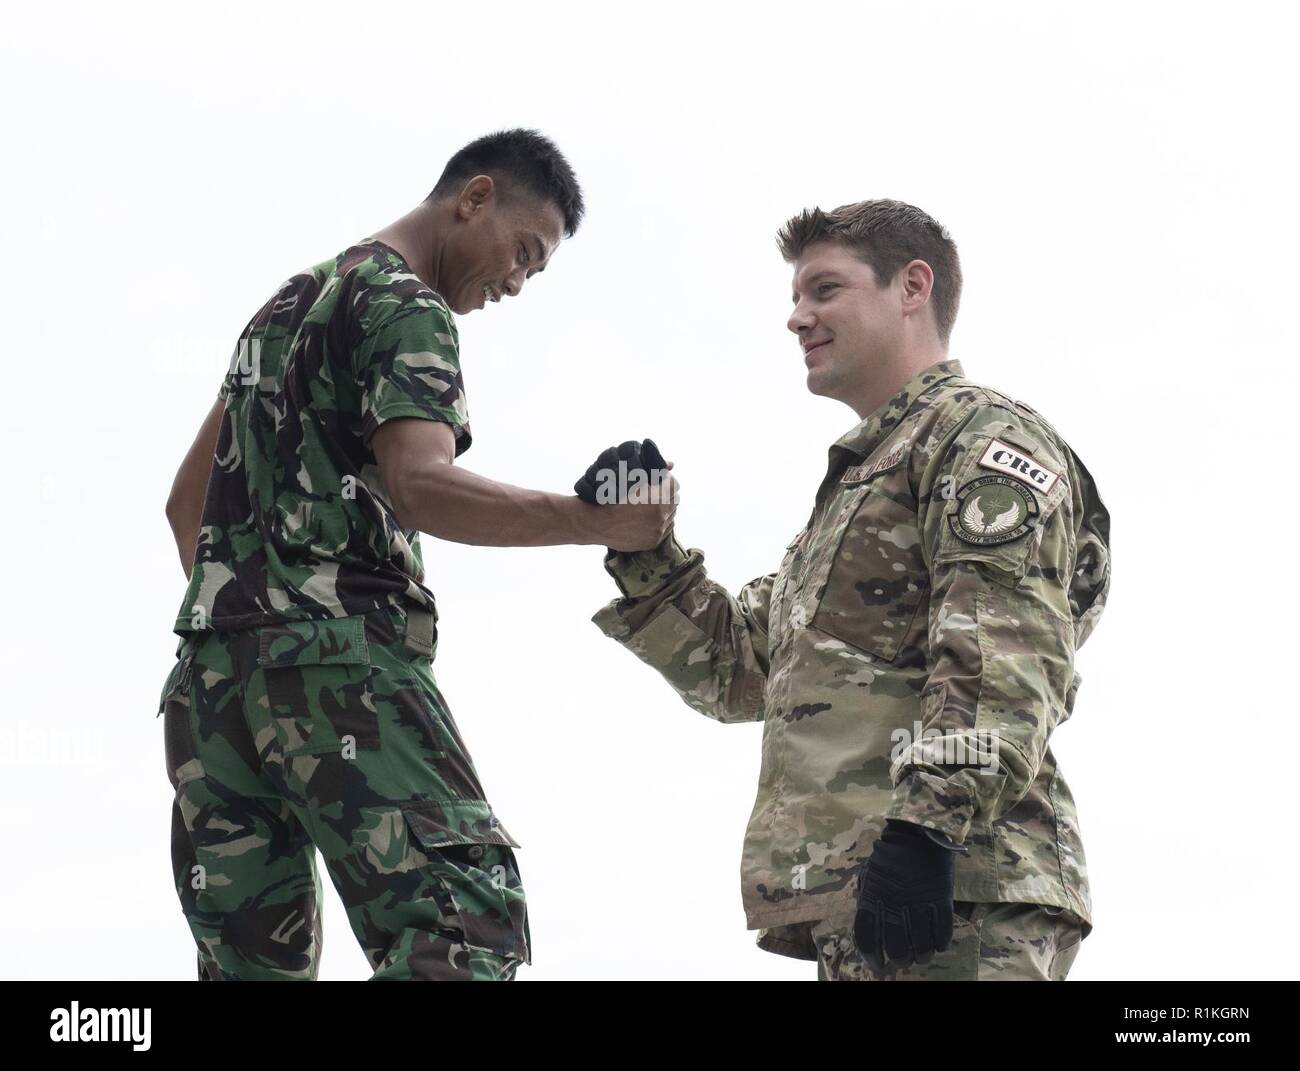 U.S. Air Force Tech. Sgt. Chad Davis, 36th Mobility Response Squadron command and control operator, at Andersen Air Force Base, Guam shakes hand with an Indonesian military member after assembling a U.S. Agency for International Development (USAID) pallet in Balikpapan, Indonesia Oct. 12, 2018. USAID is airlifting    over 2,210 rolls of heavy-duty plastic sheeting to provide emergency shelter for 110,500 people in Indonesia and is working with its partners to provide emergency shelter kits, blankets, hygiene kits, solar-powered lamps, other critical relief supplies. USAID has also made it a pr Stock Photo